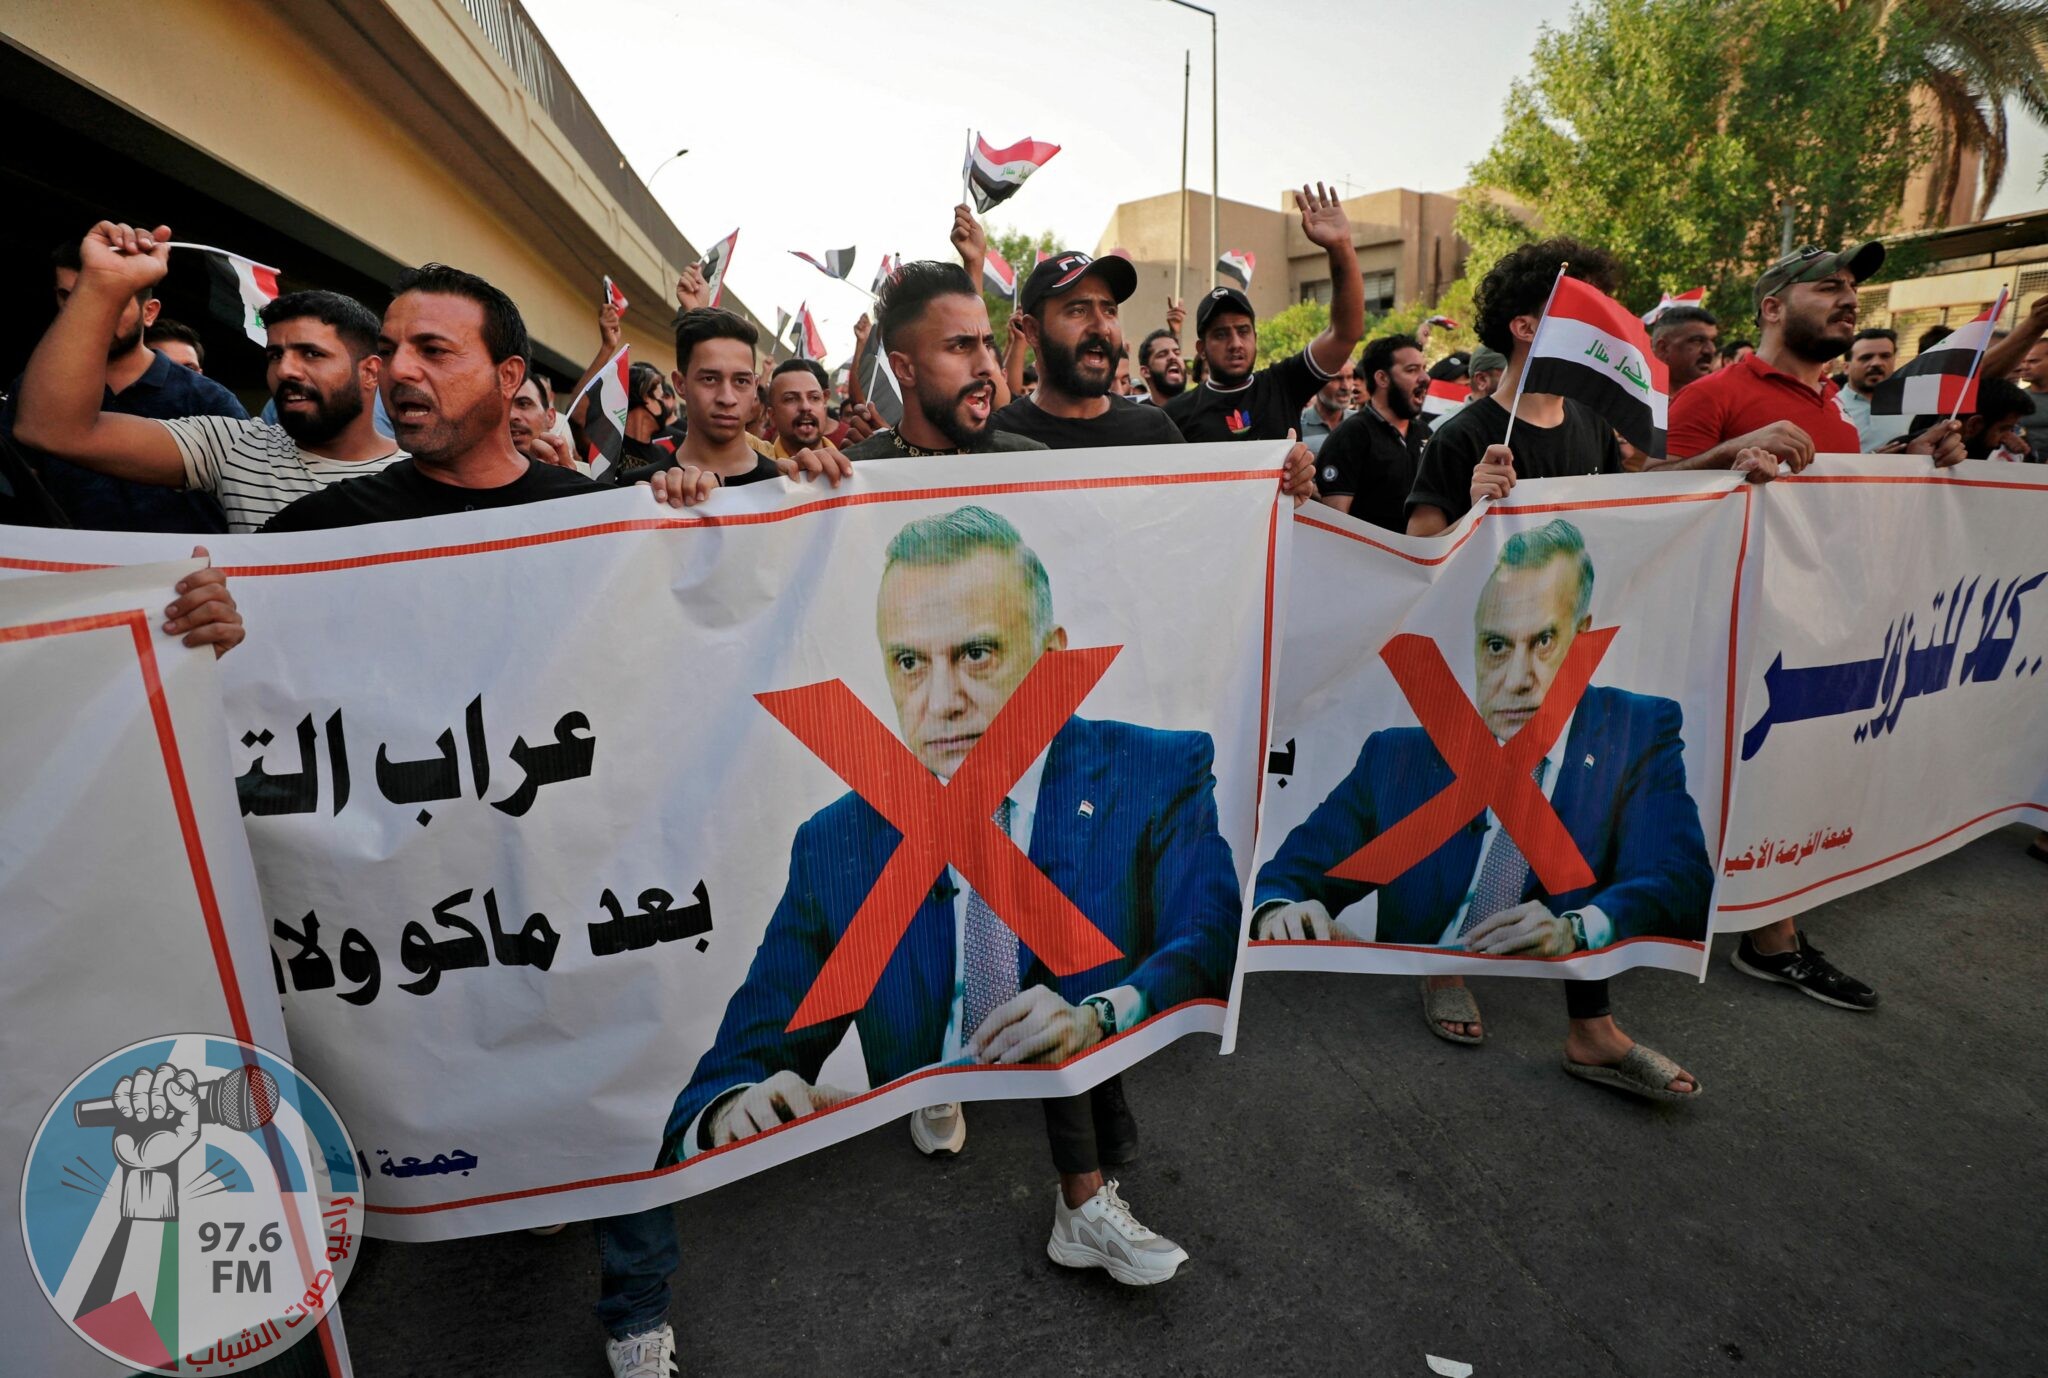 Iraqi demonstrators lift banners against Prime Minister Mustafa Al-Kadhimi during a protest rejecting last month's election result, near an entrance to the Green Zone in Baghdad on November 5, 2021. Hundreds of supporters of pro-Iran groups clashed with security forces in Iraq's capital, expressing their fury over last month's election result, AFP journalists and a security source said. (Photo by Ahmad AL-RUBAYE / AFP)